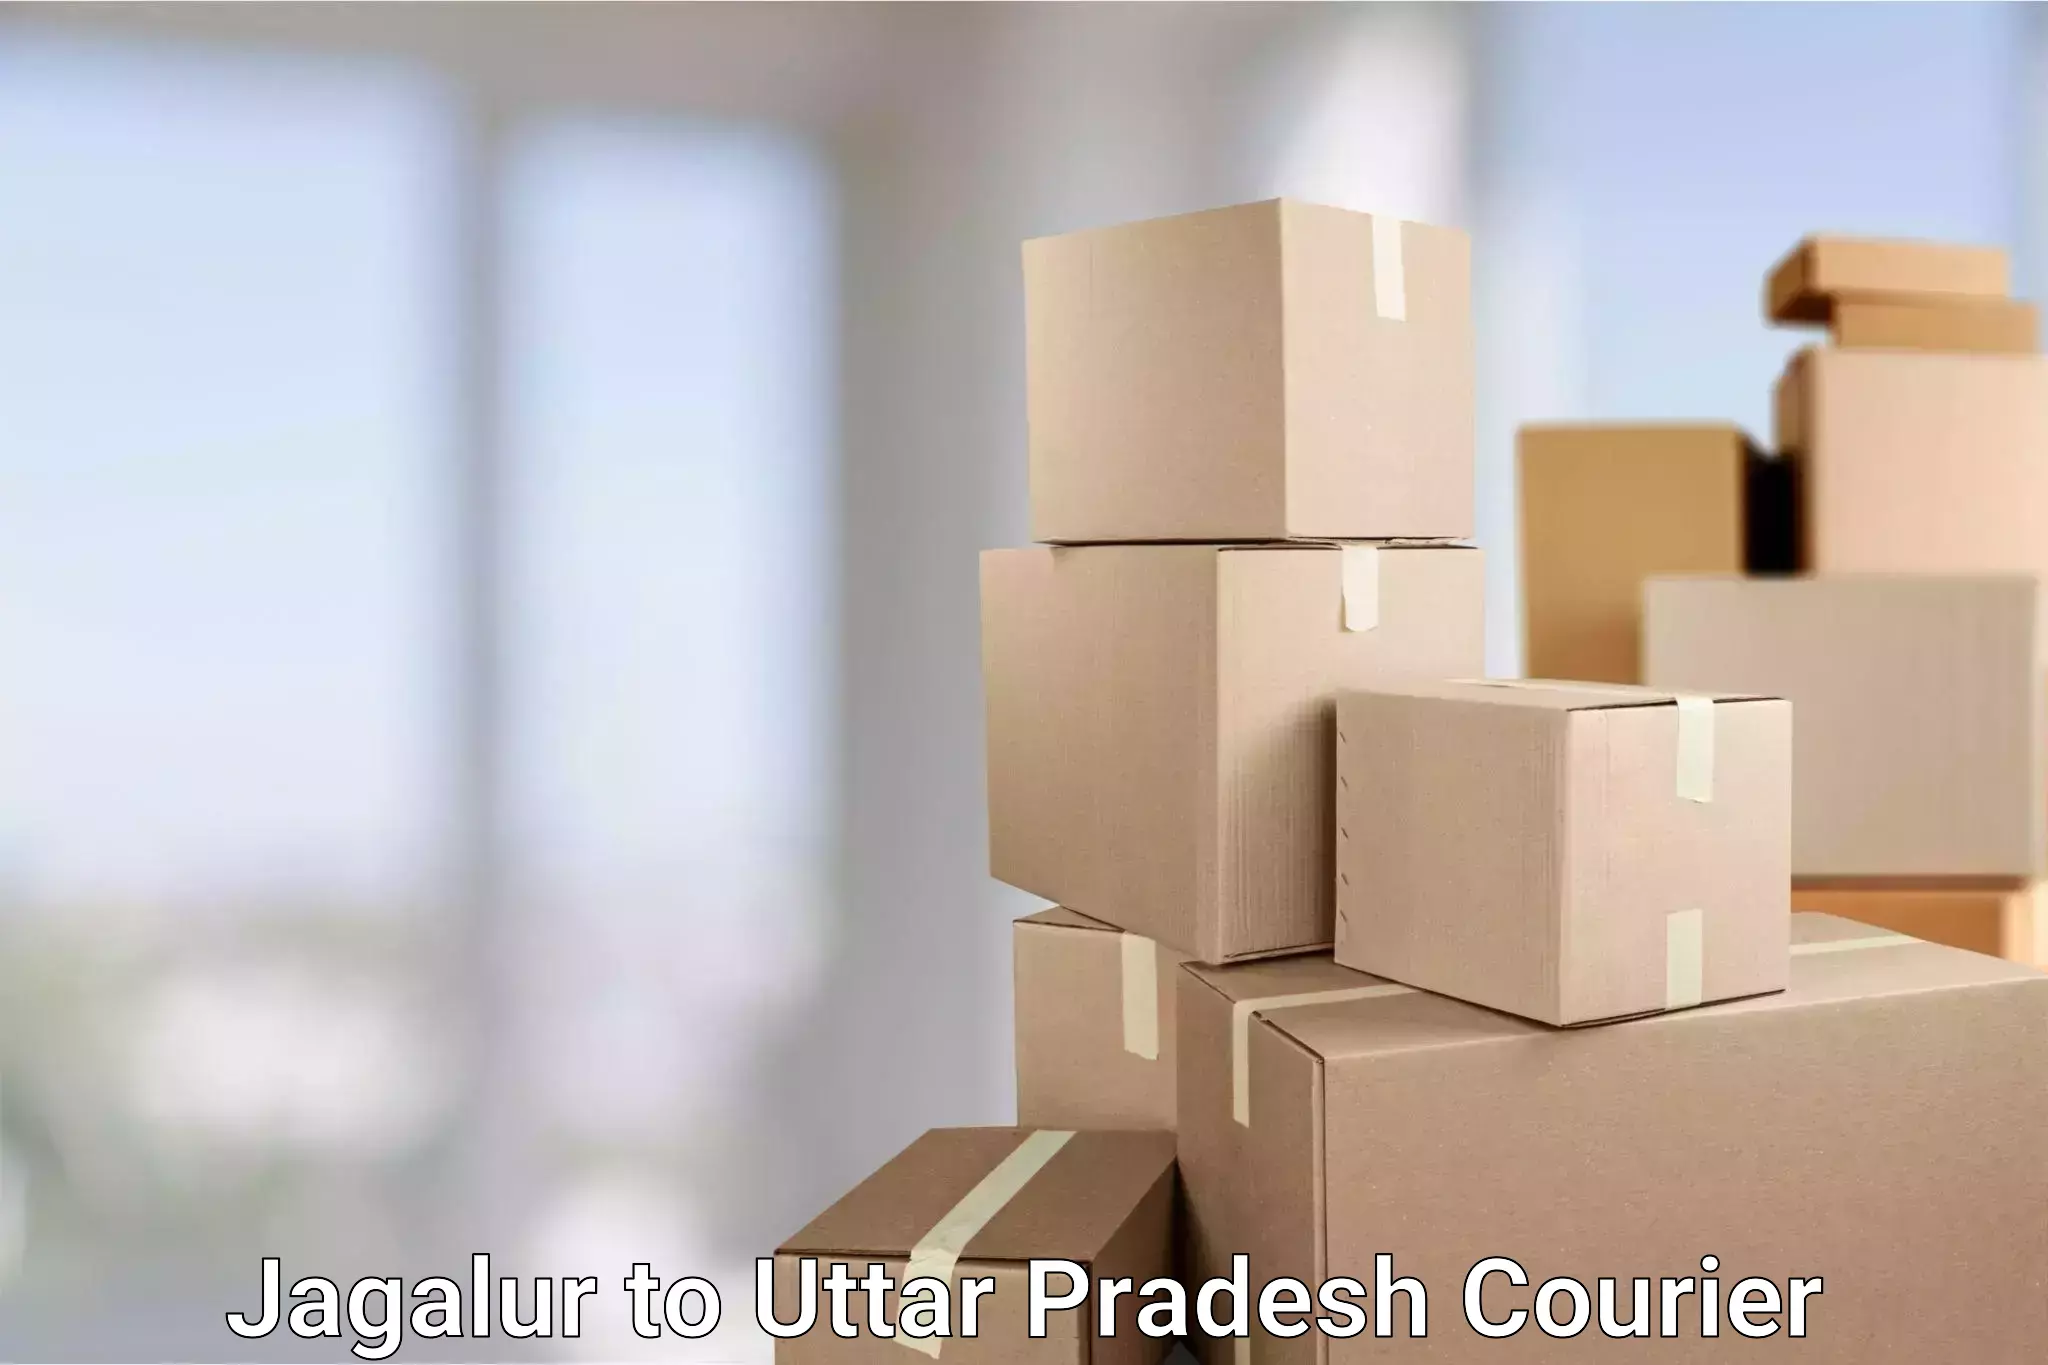 Package delivery network Jagalur to Aligarh